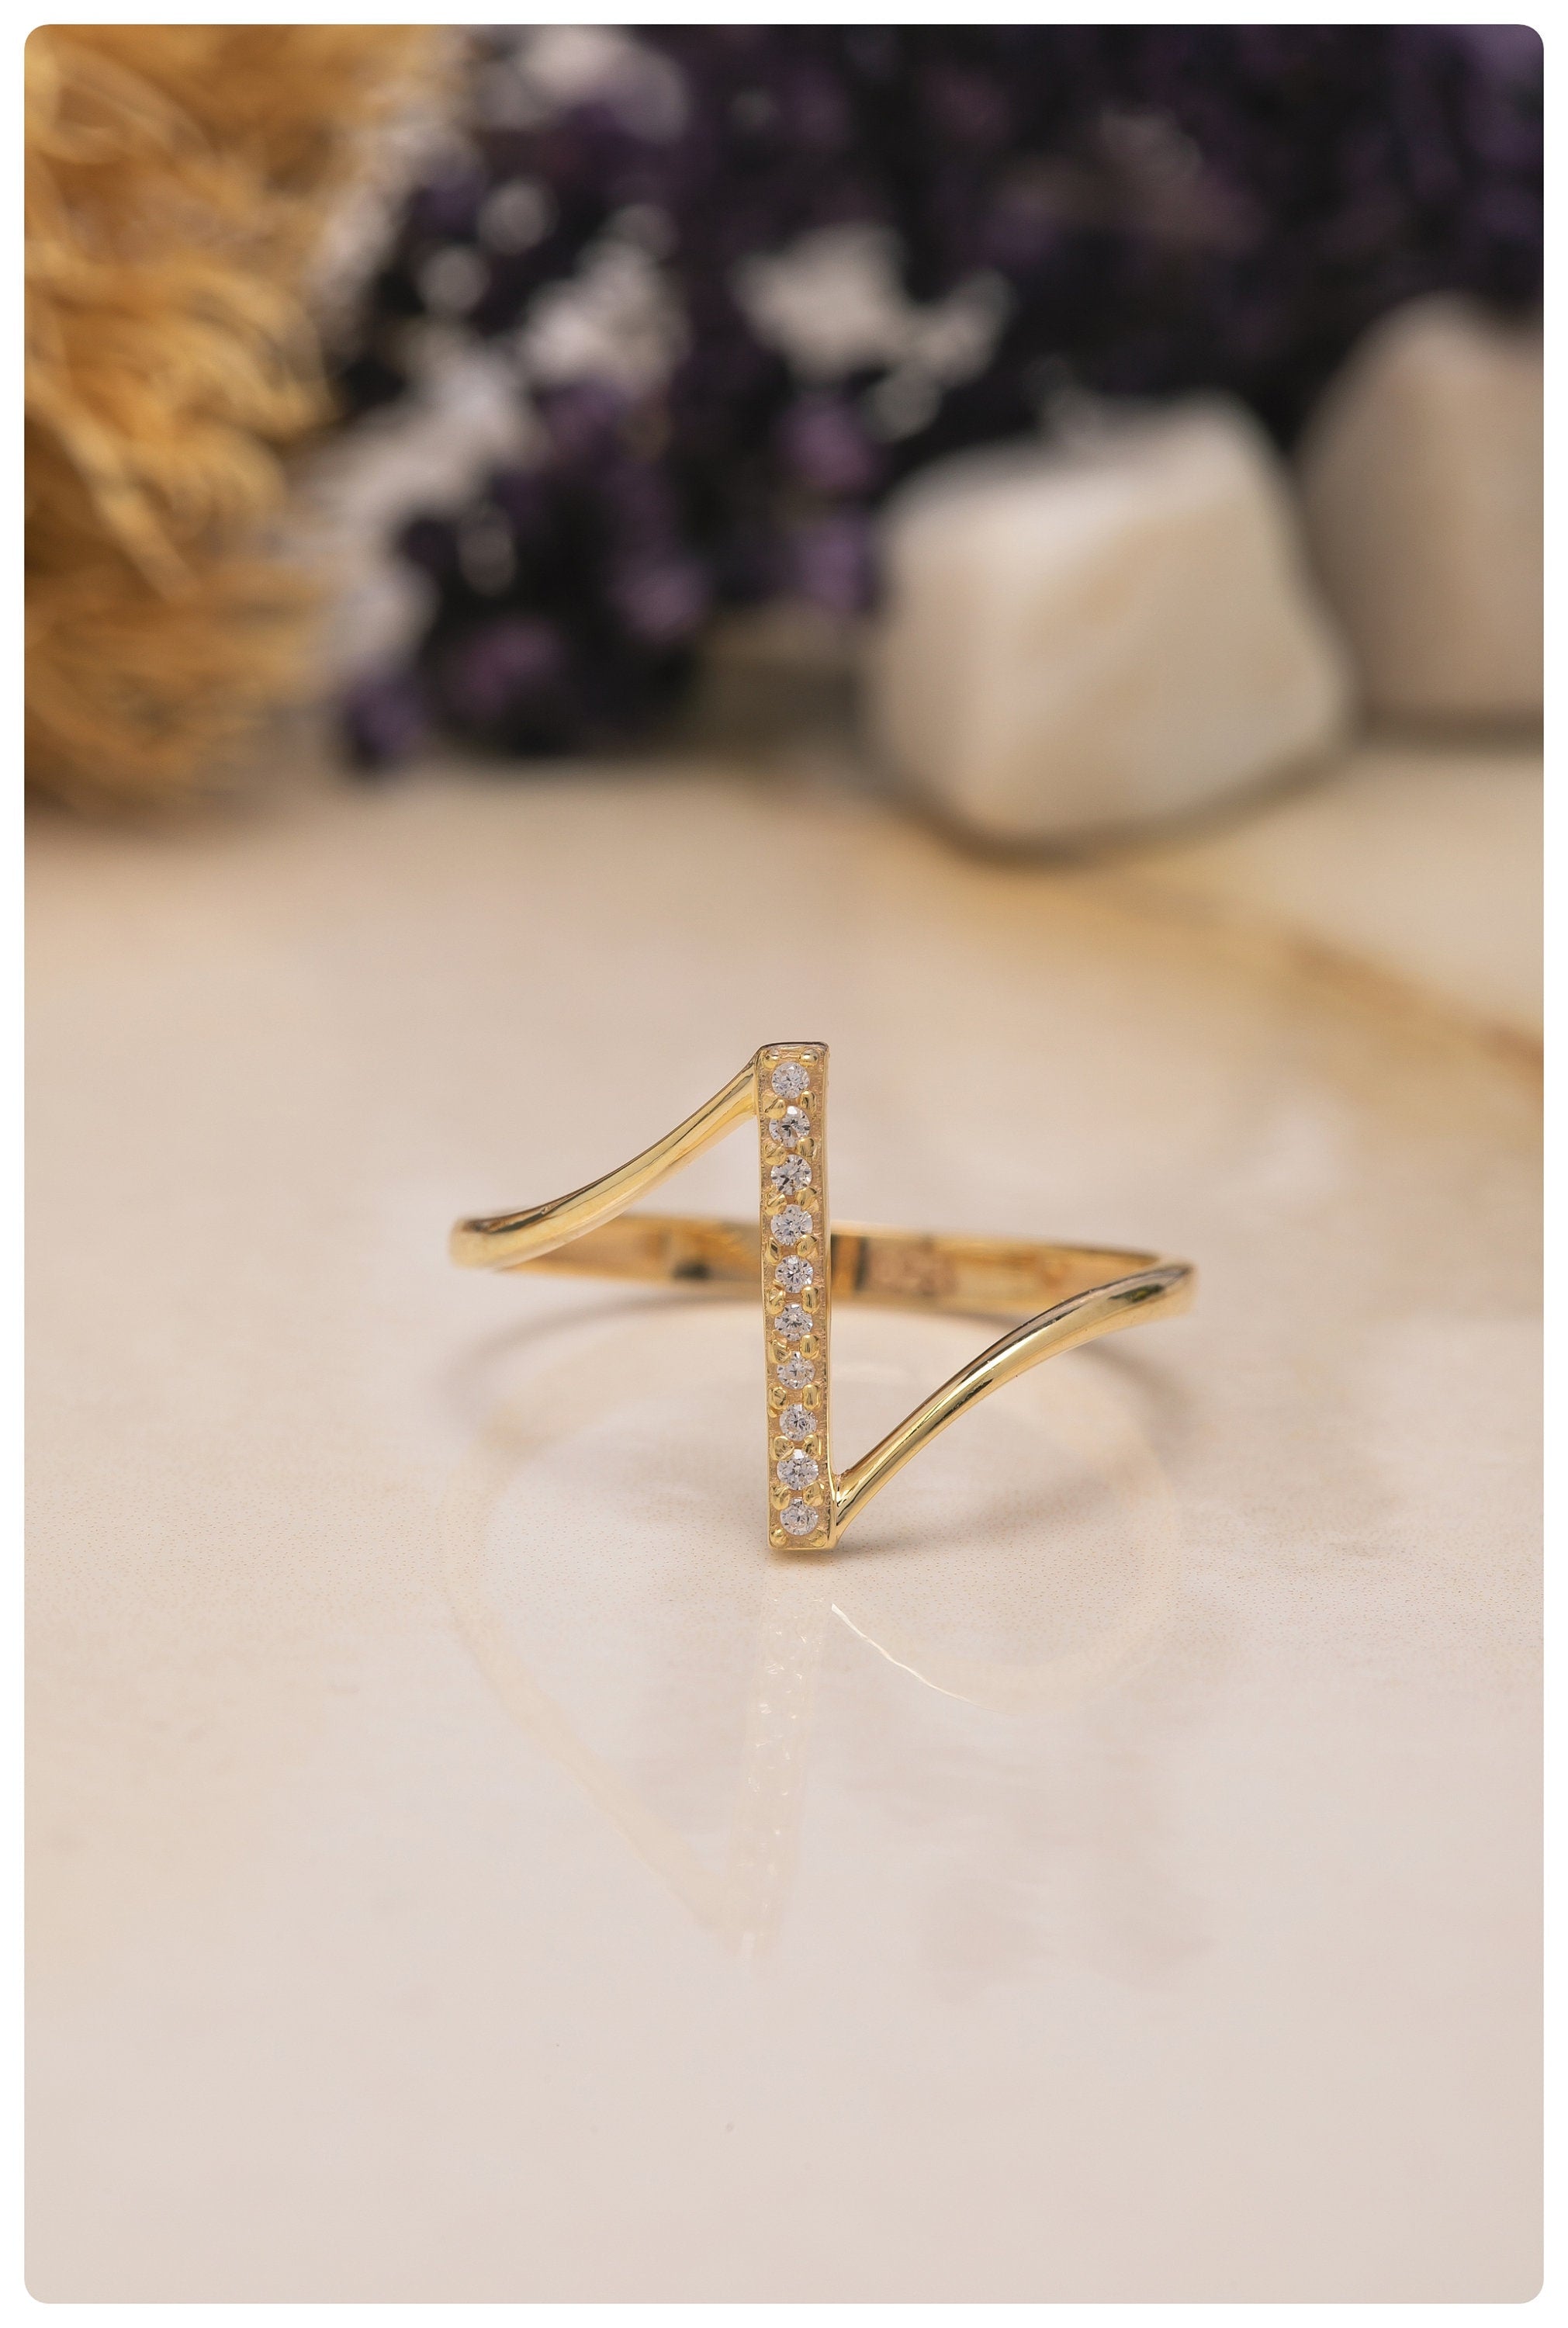 14k Gold CZ Zircon Ring - Delicate Unique Ring - Dainty Minimalist Stacking Ring for Women - Gift For Mother Day - Mother Day Jewelry